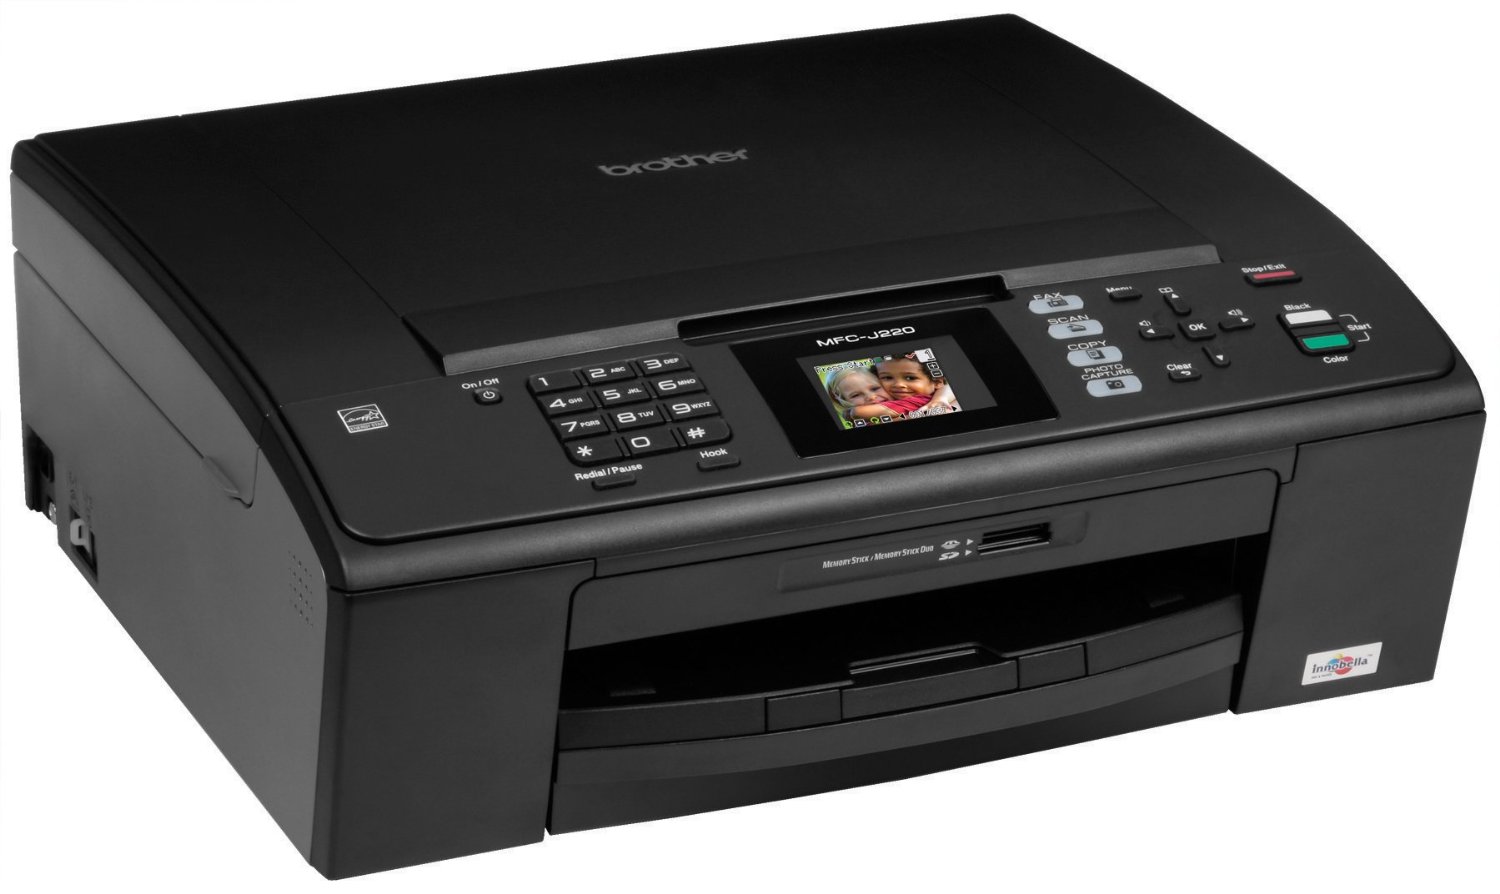 brother printer software update for windows 10